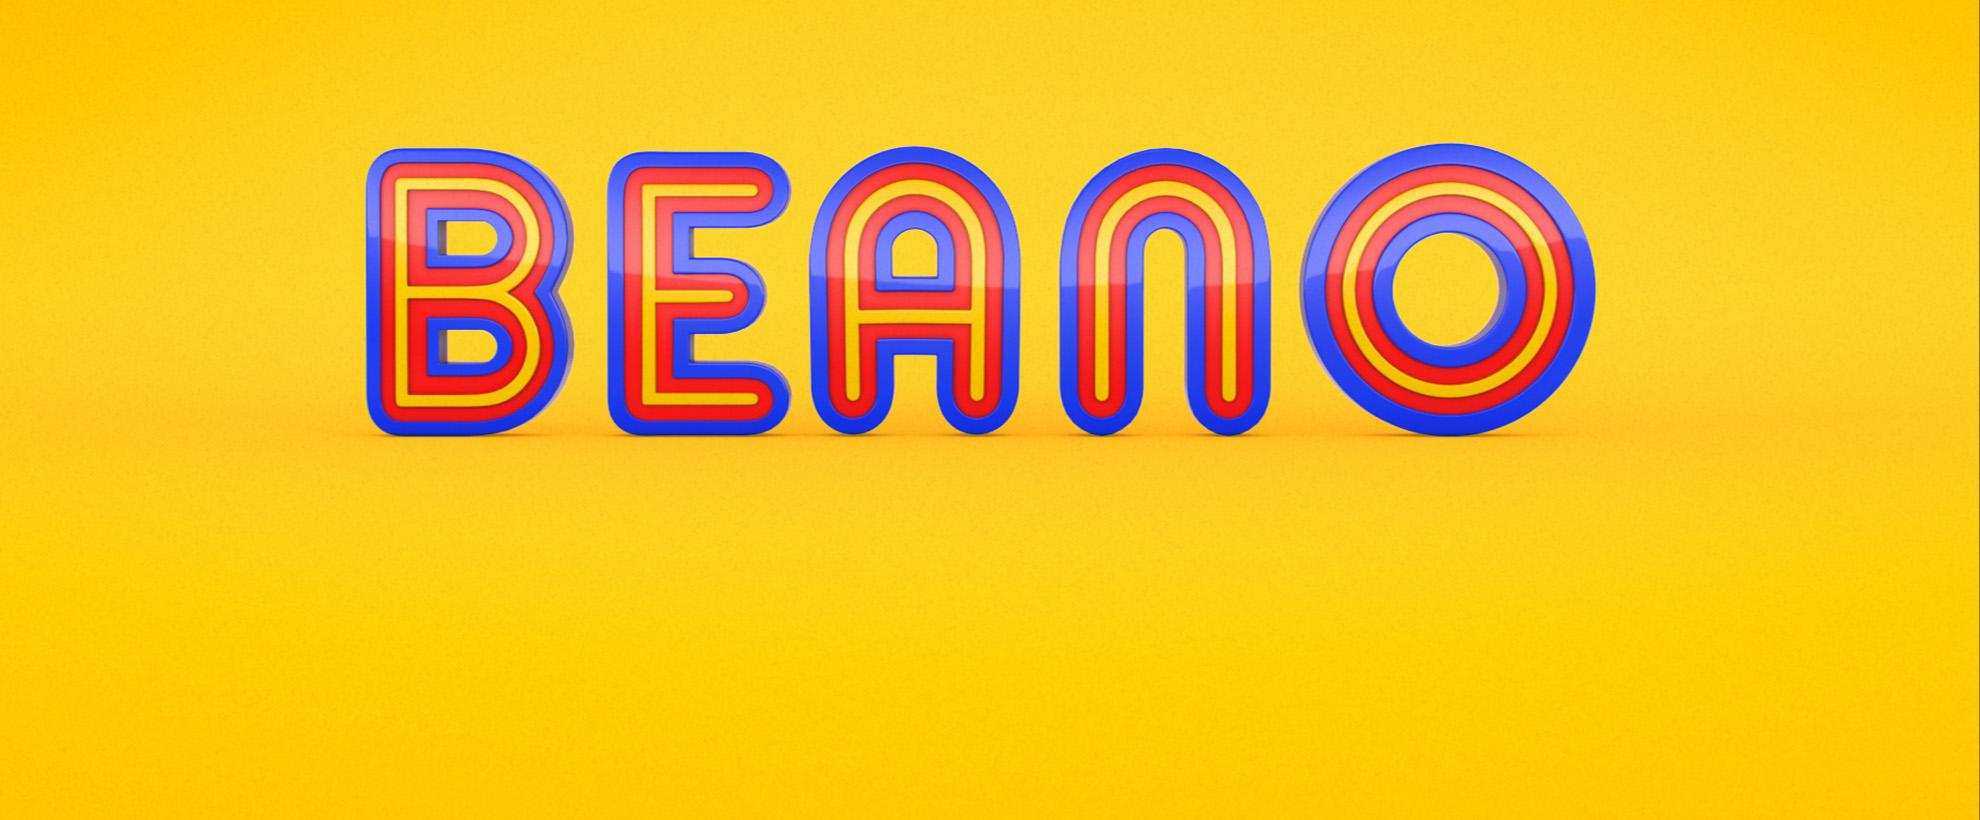 The Beano logo on a yellow background.